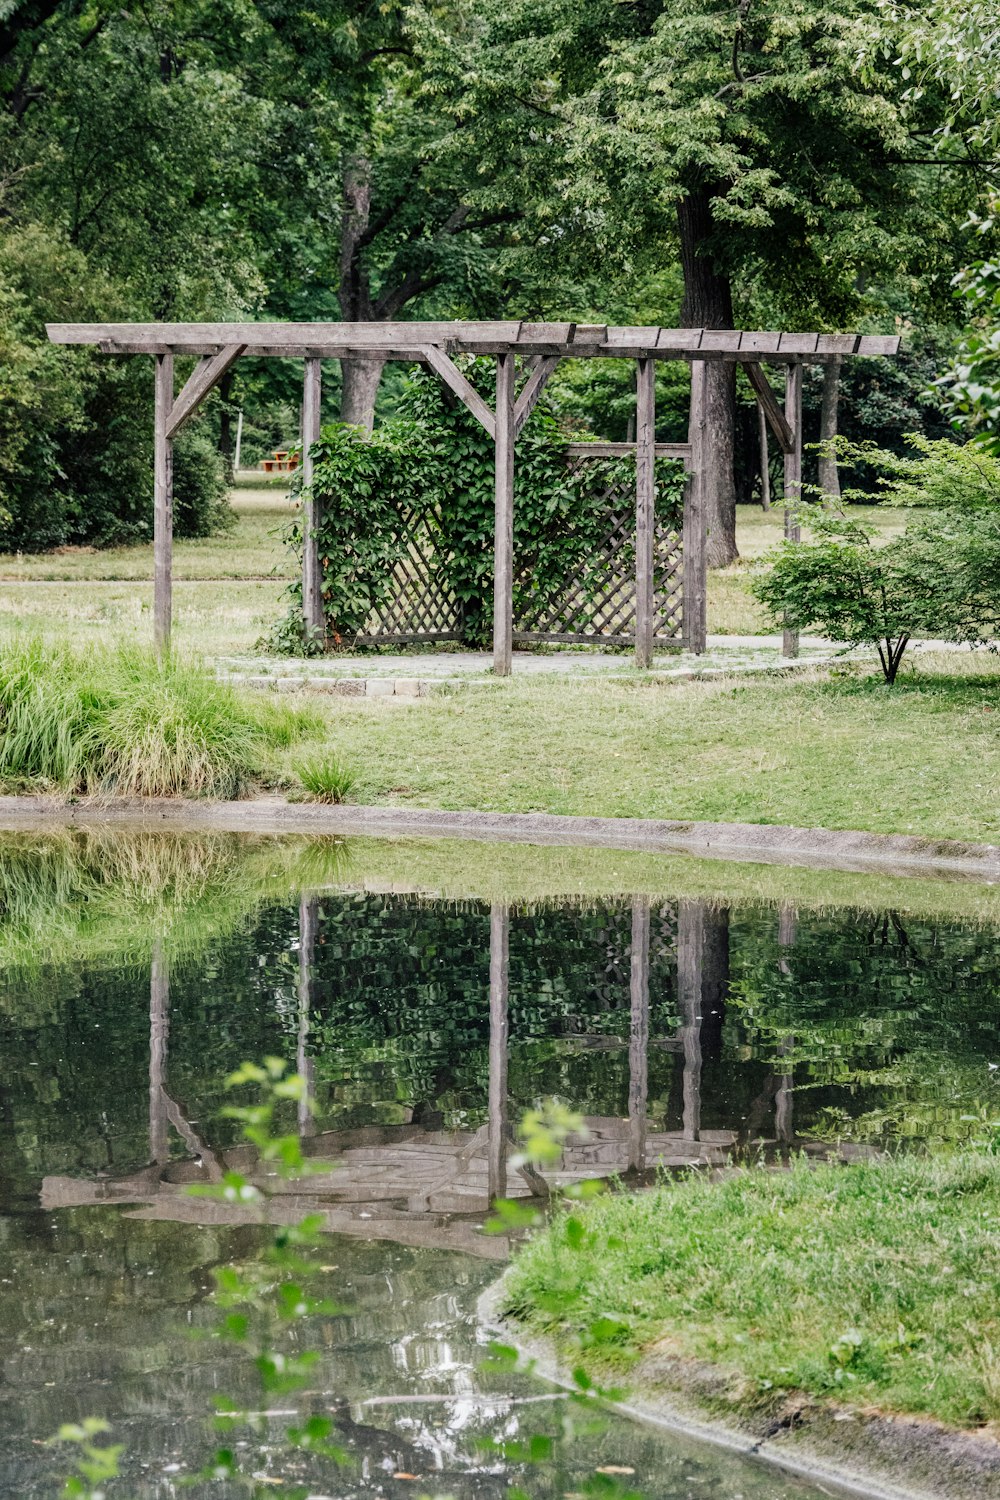 a gazebo in the middle of a grassy area next to a body of water